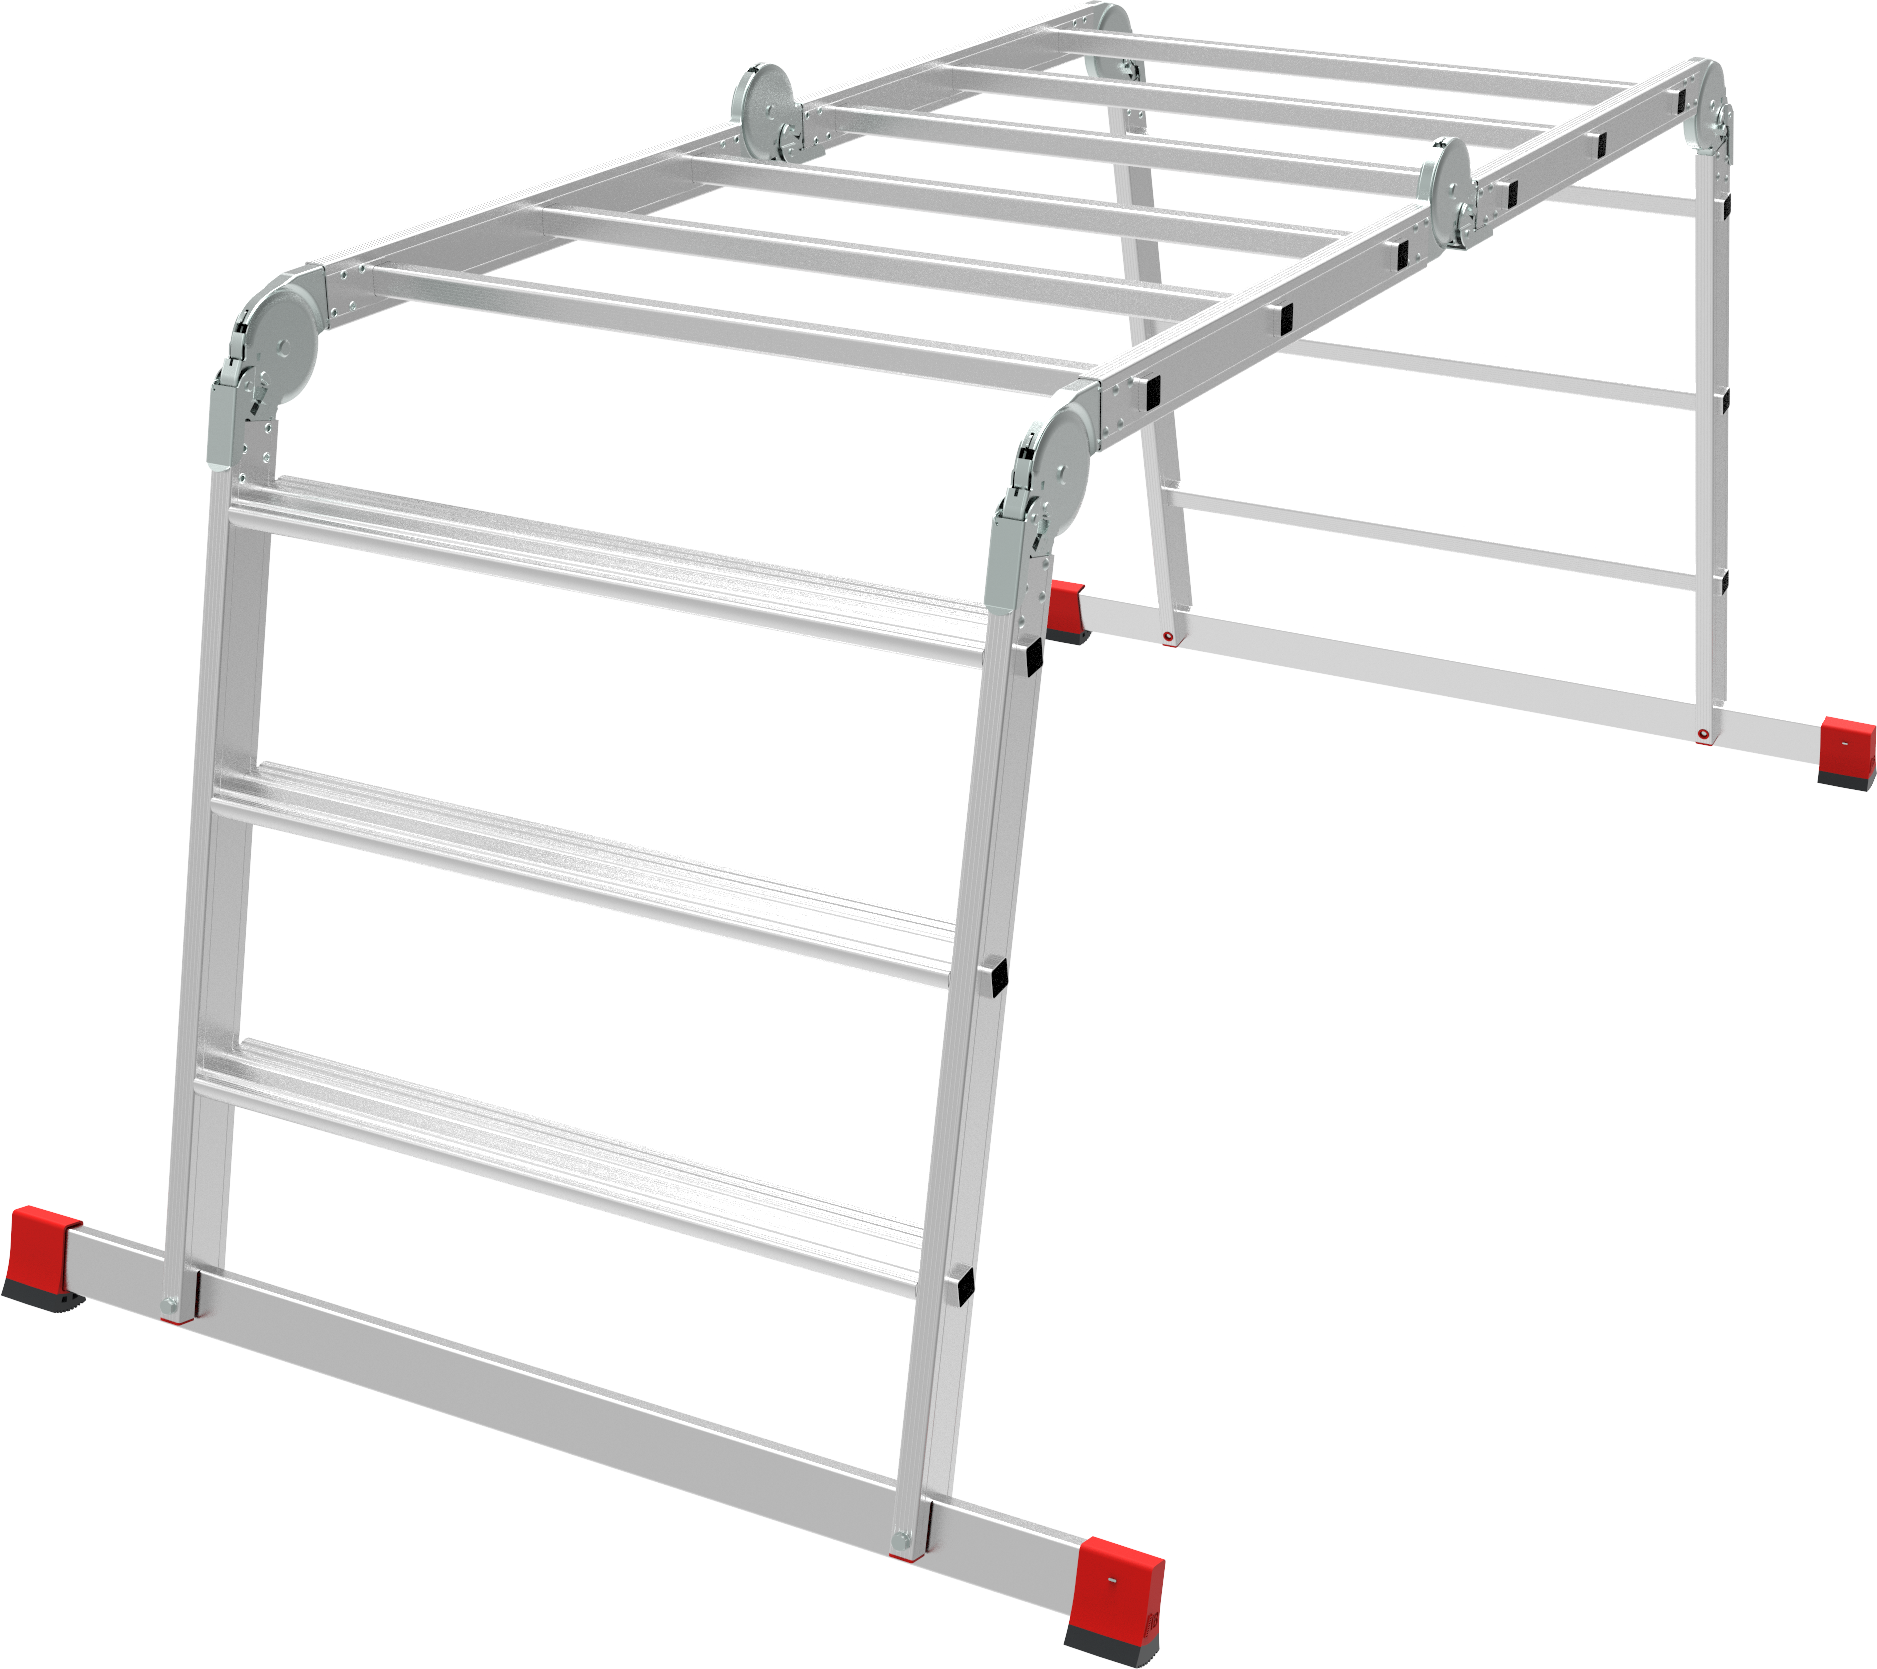 Multipurpose aluminum professional hinged rung ladder 800 mm width with 80 mm flanged steps NV3326